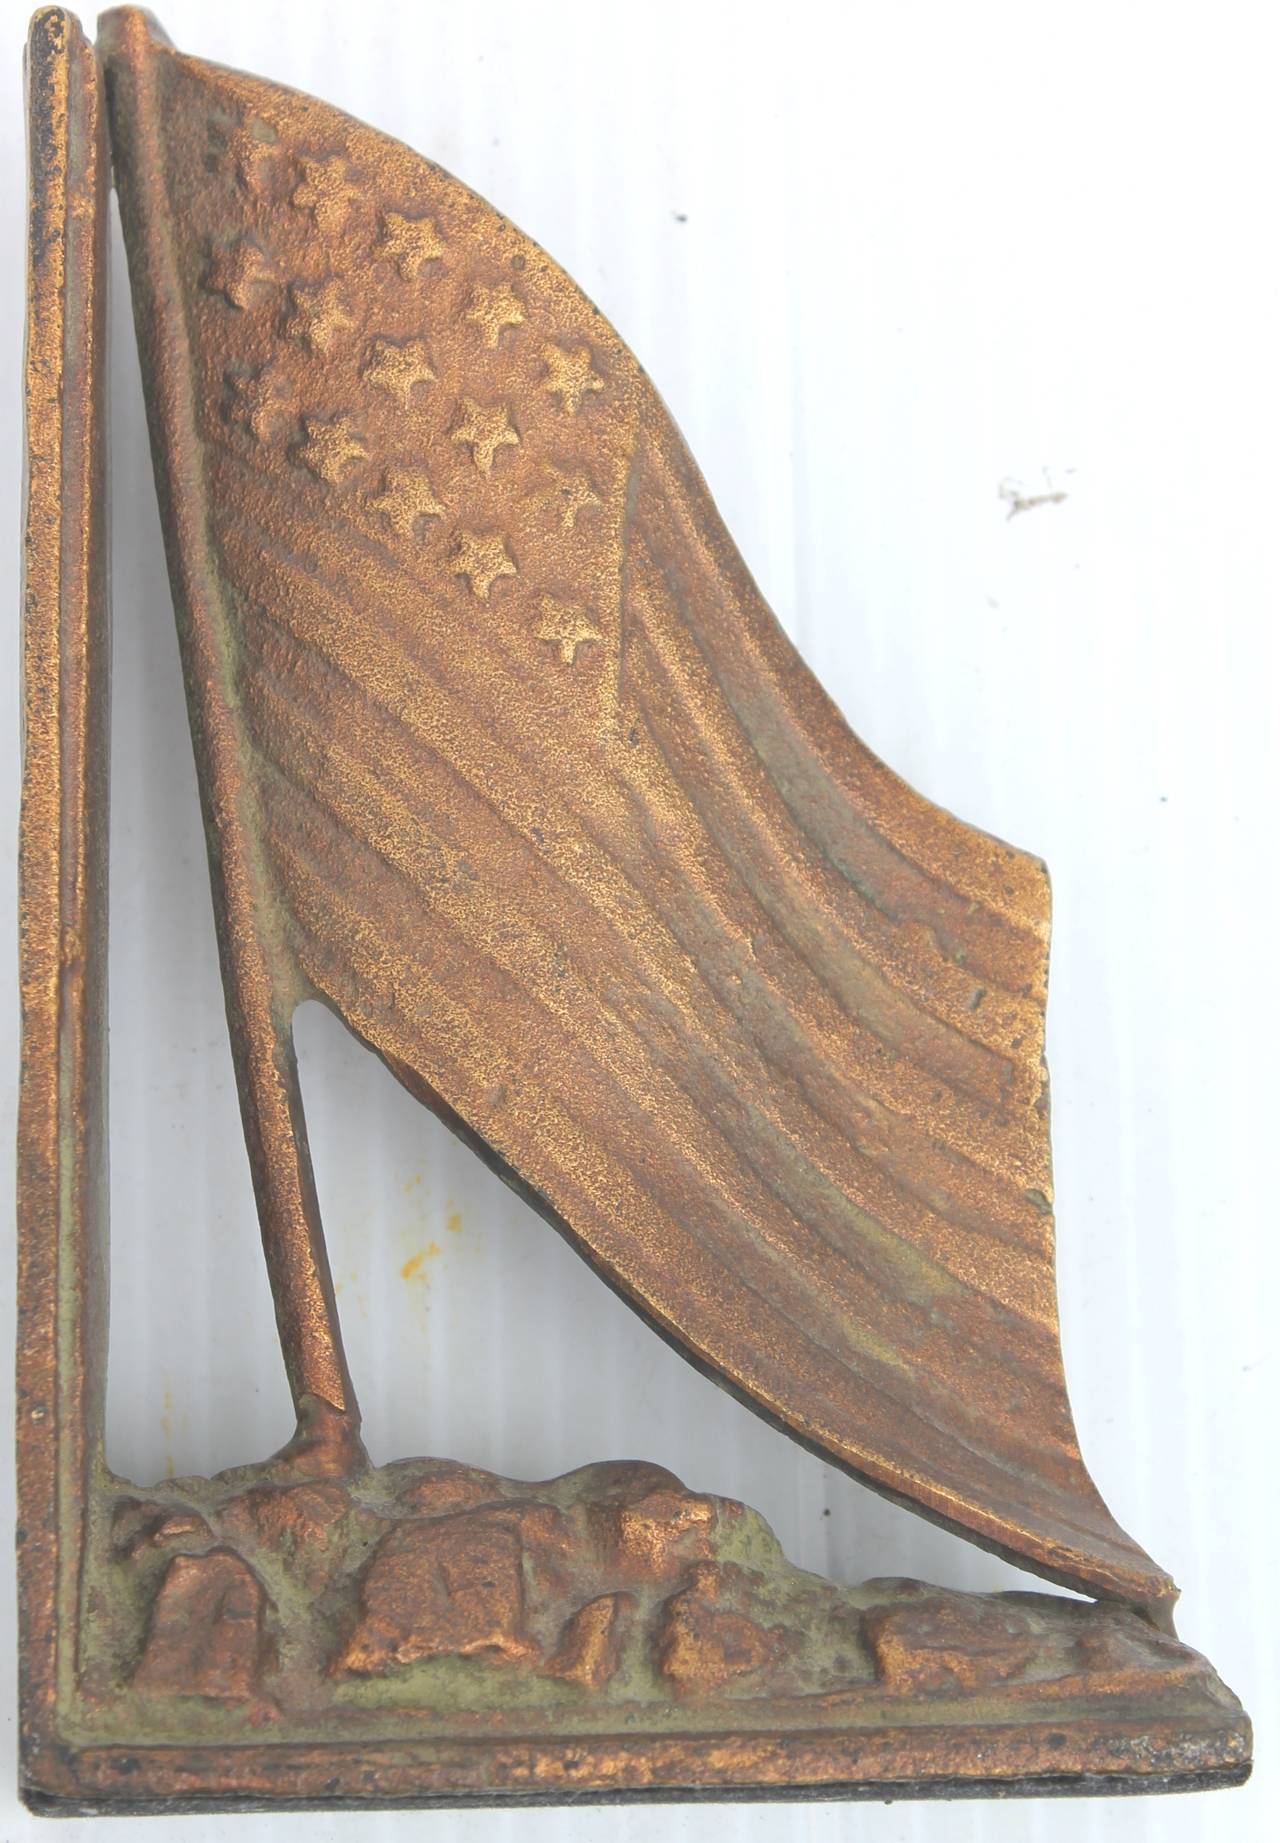 Early 20th c American Flag doorstop with a wonderful gilded surface over brass. The condition is very good.